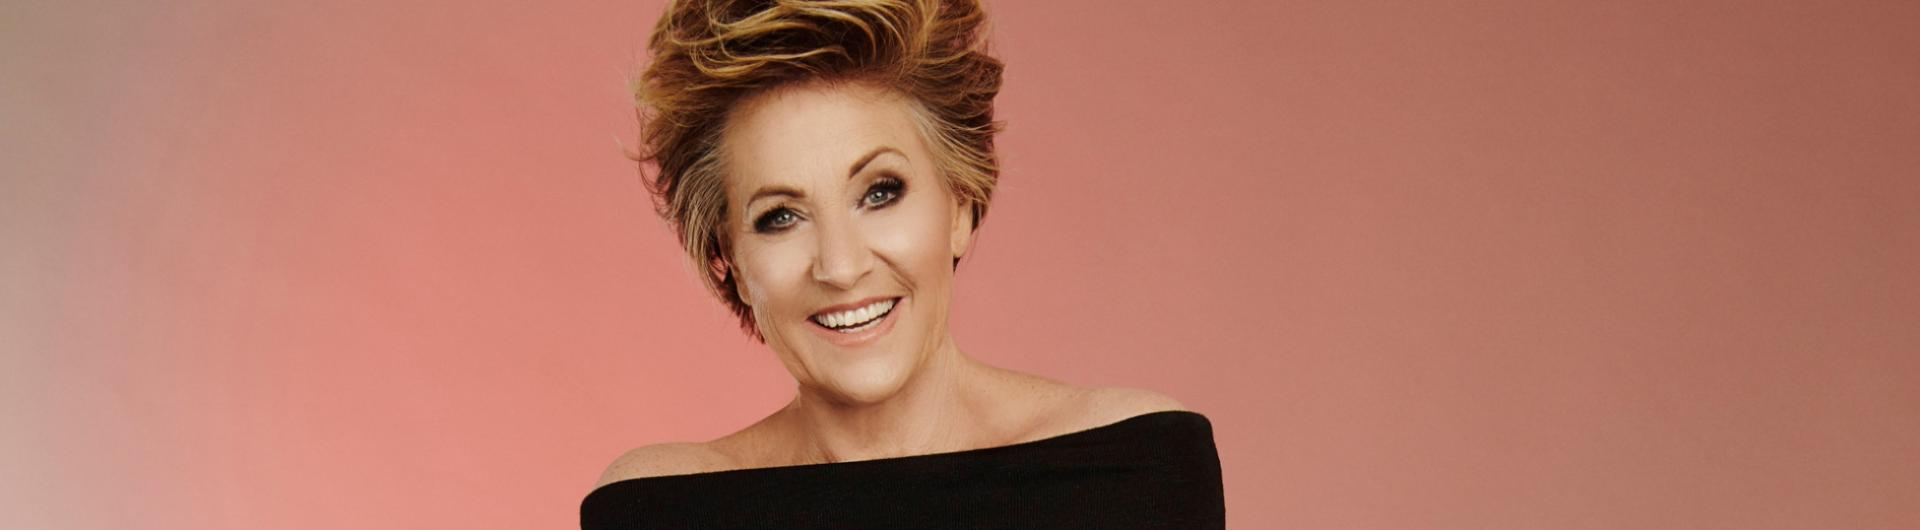 Lorna Luft in a black top, bare shoulders against a peach colored background.